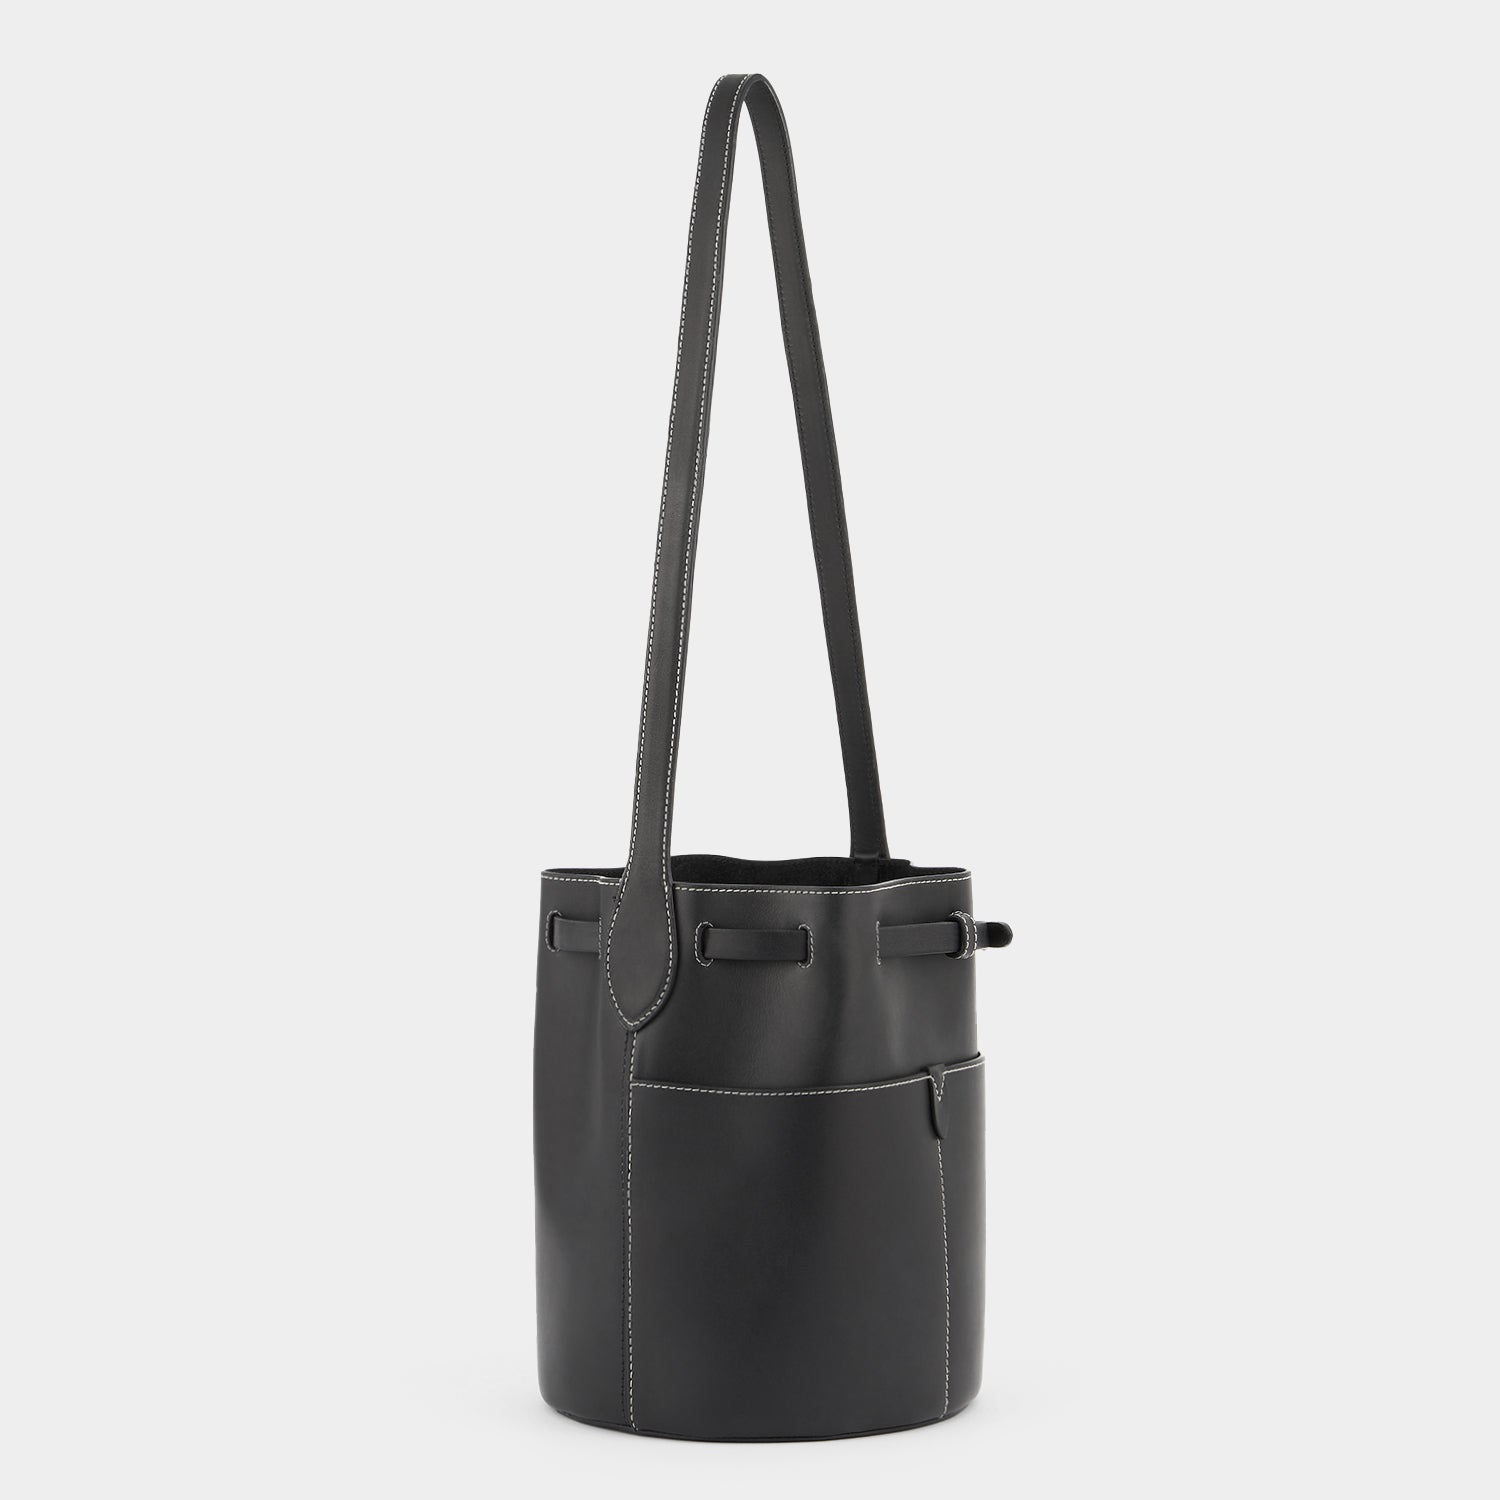 Return to Nature Small Bucket Bag -

                  
                    Compostable Leather in Black -
                  

                  Anya Hindmarch EU
